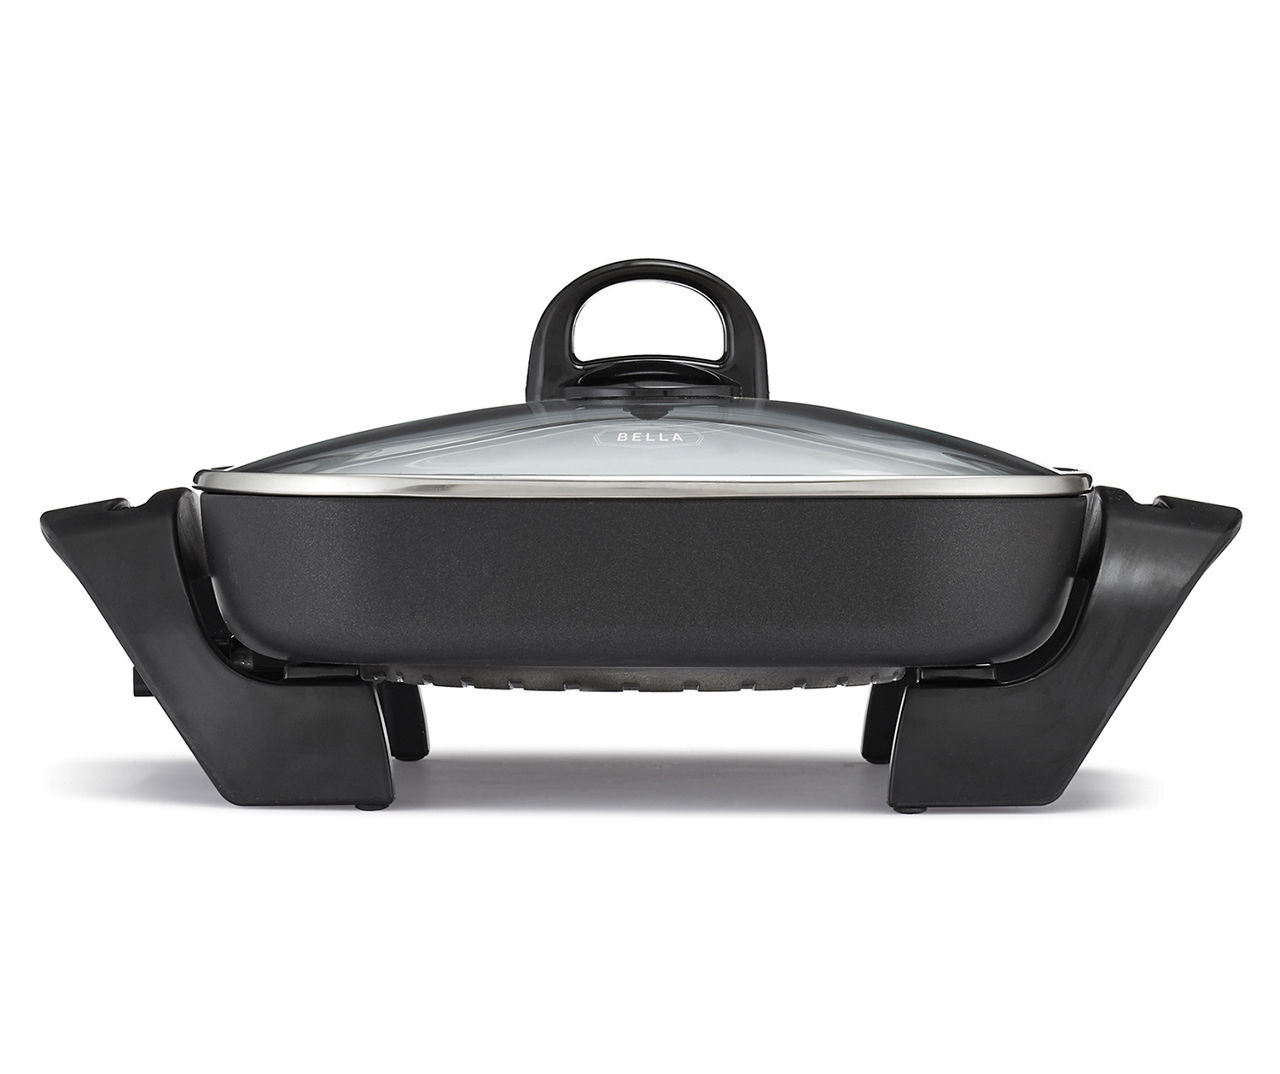 12-inch Electric Skillet